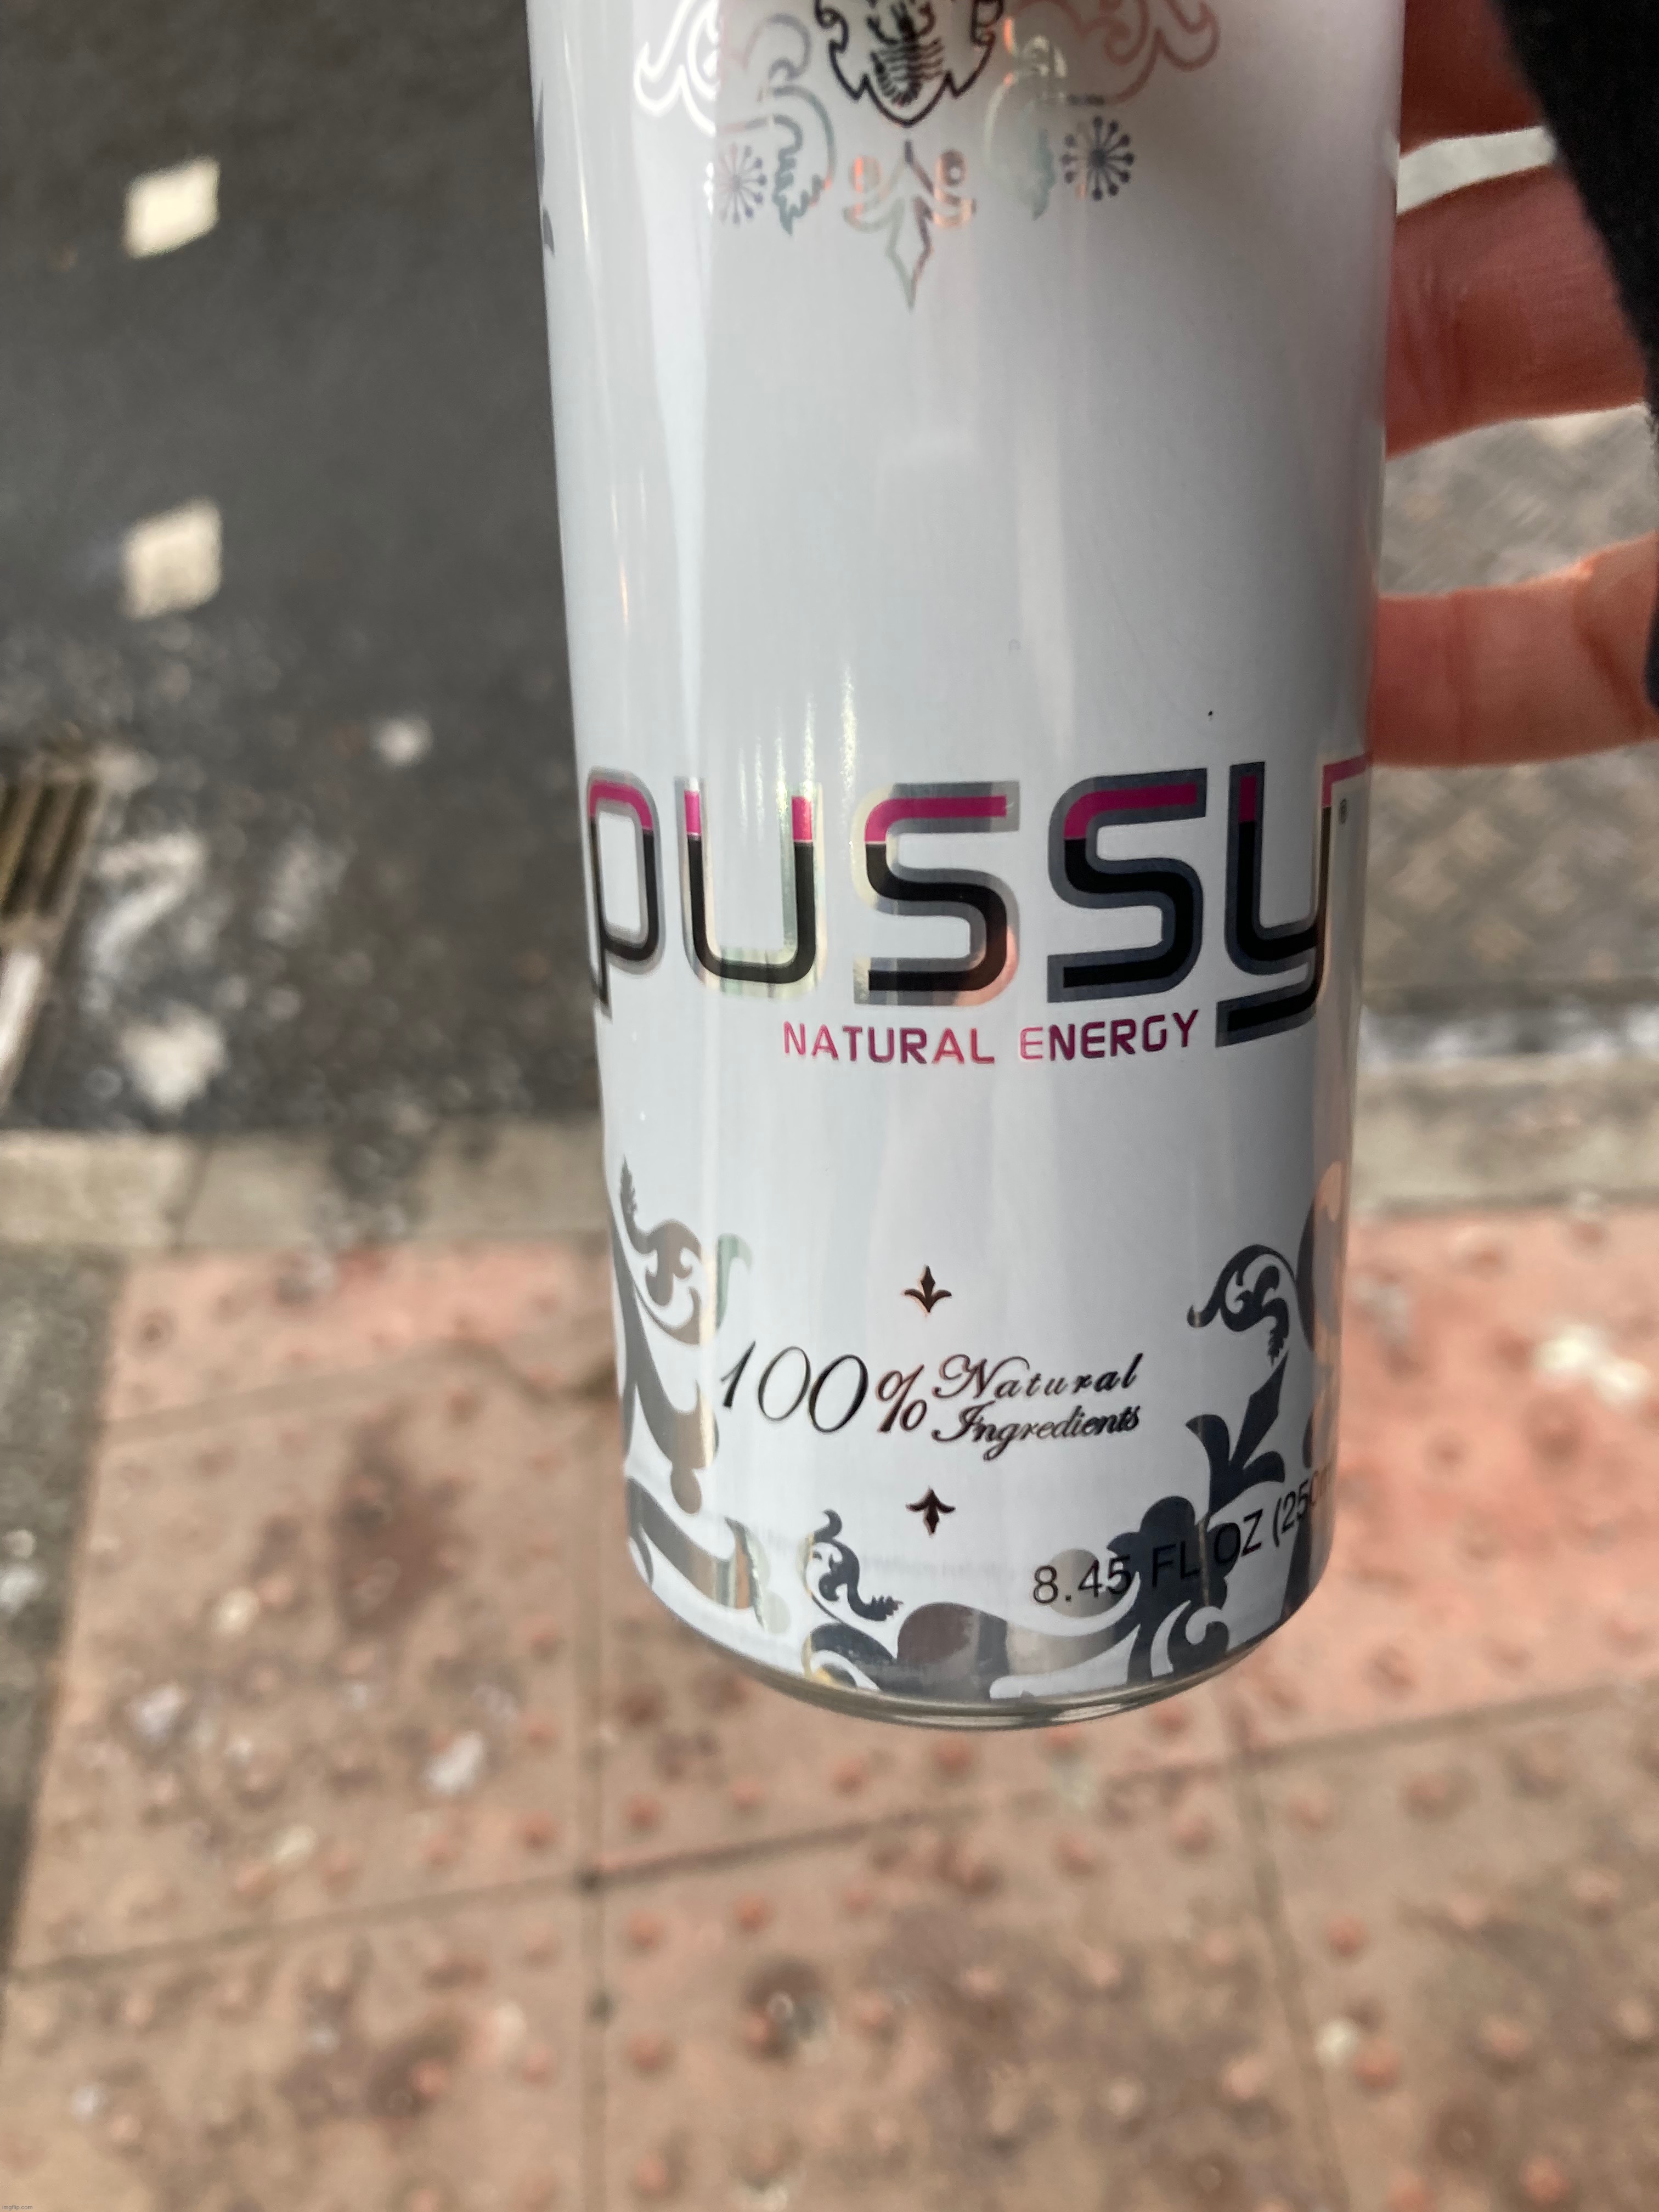 Got this funny energy drink the other day | image tagged in pussy,energy drinks,funny | made w/ Imgflip meme maker